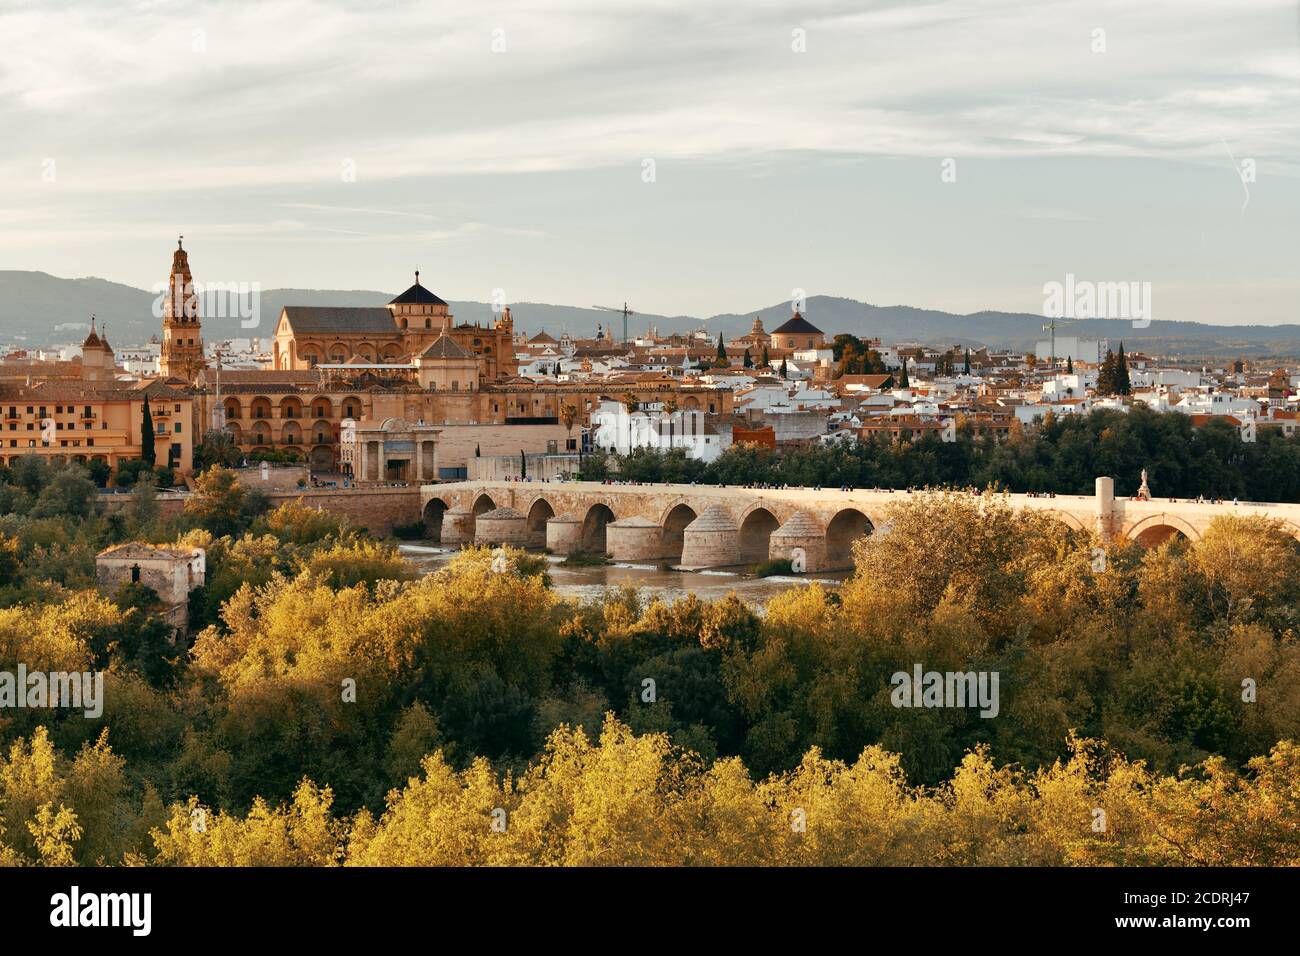 Mosque-Cathedral, ancient bridge and city skyline of Cordoba in Spain. Stock Photo